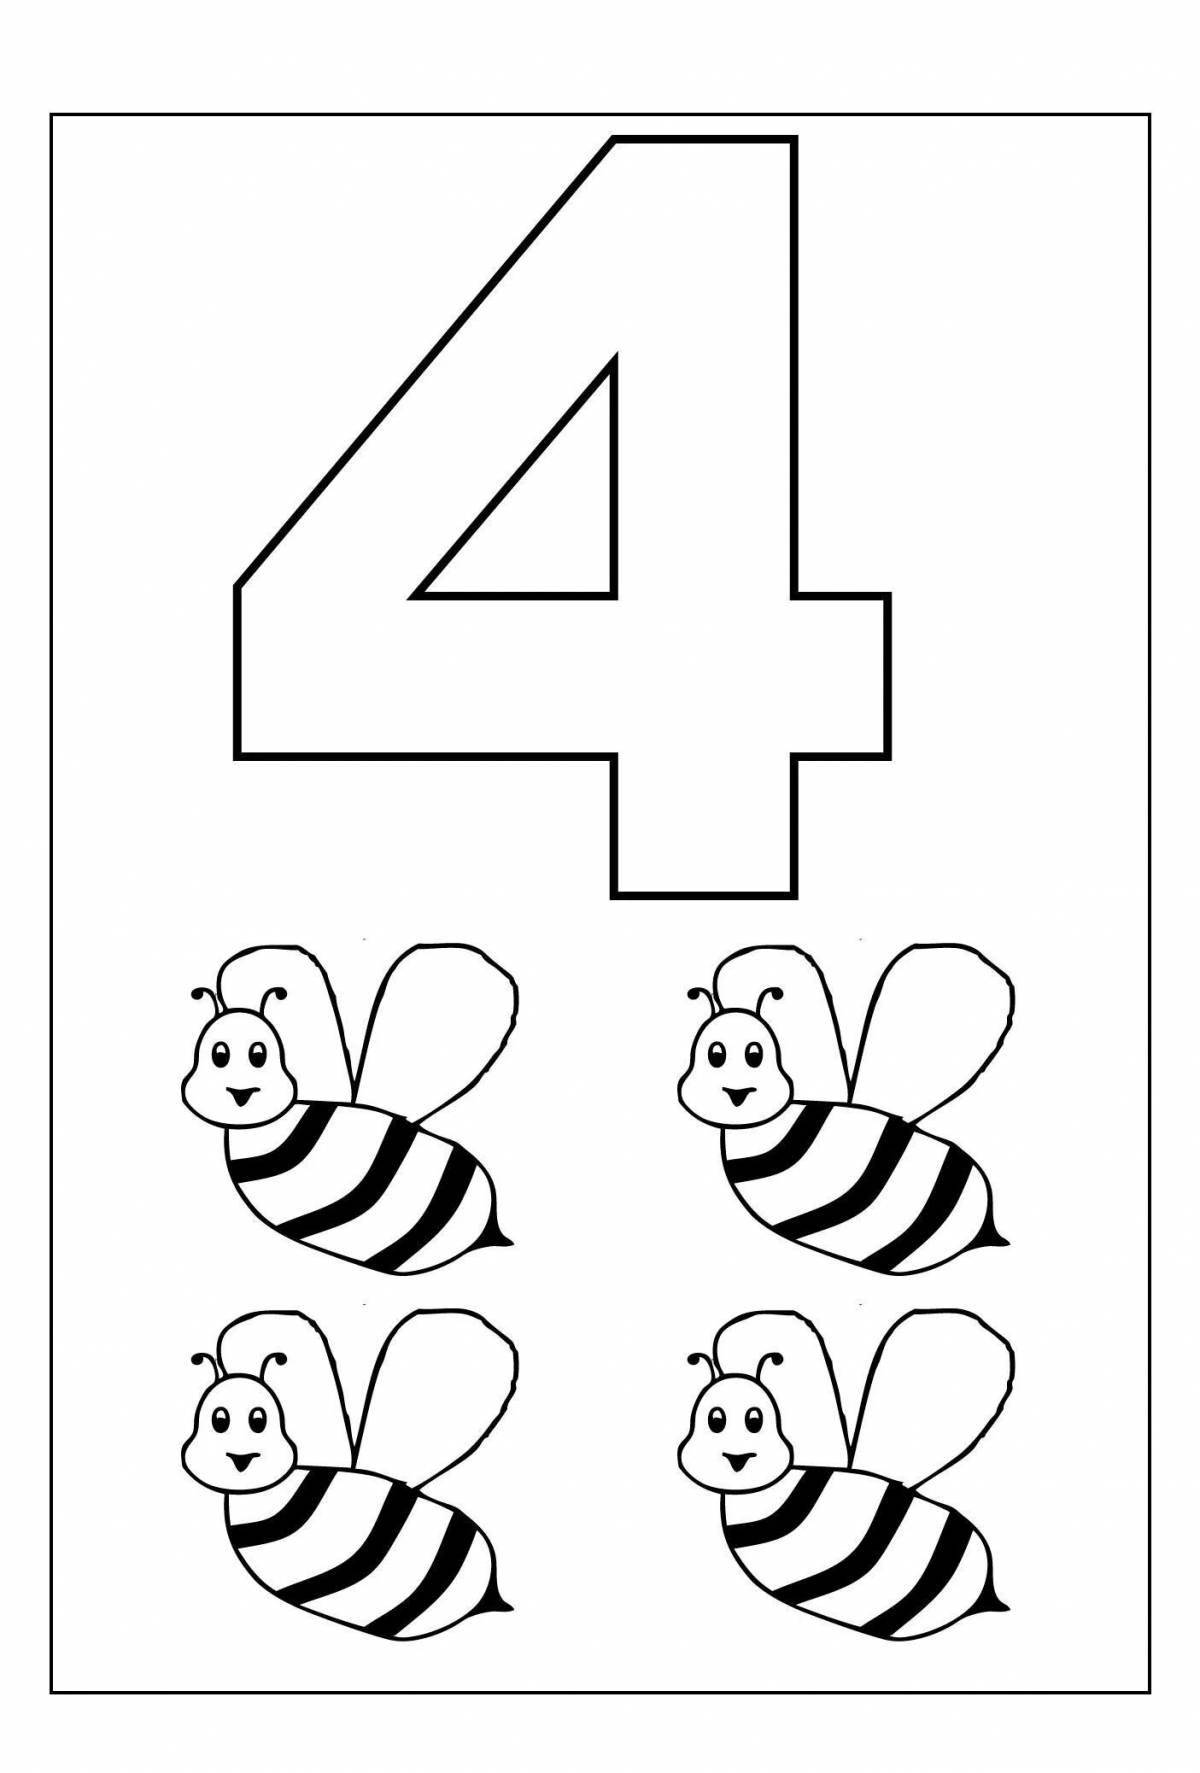 Coloring number 4 for children